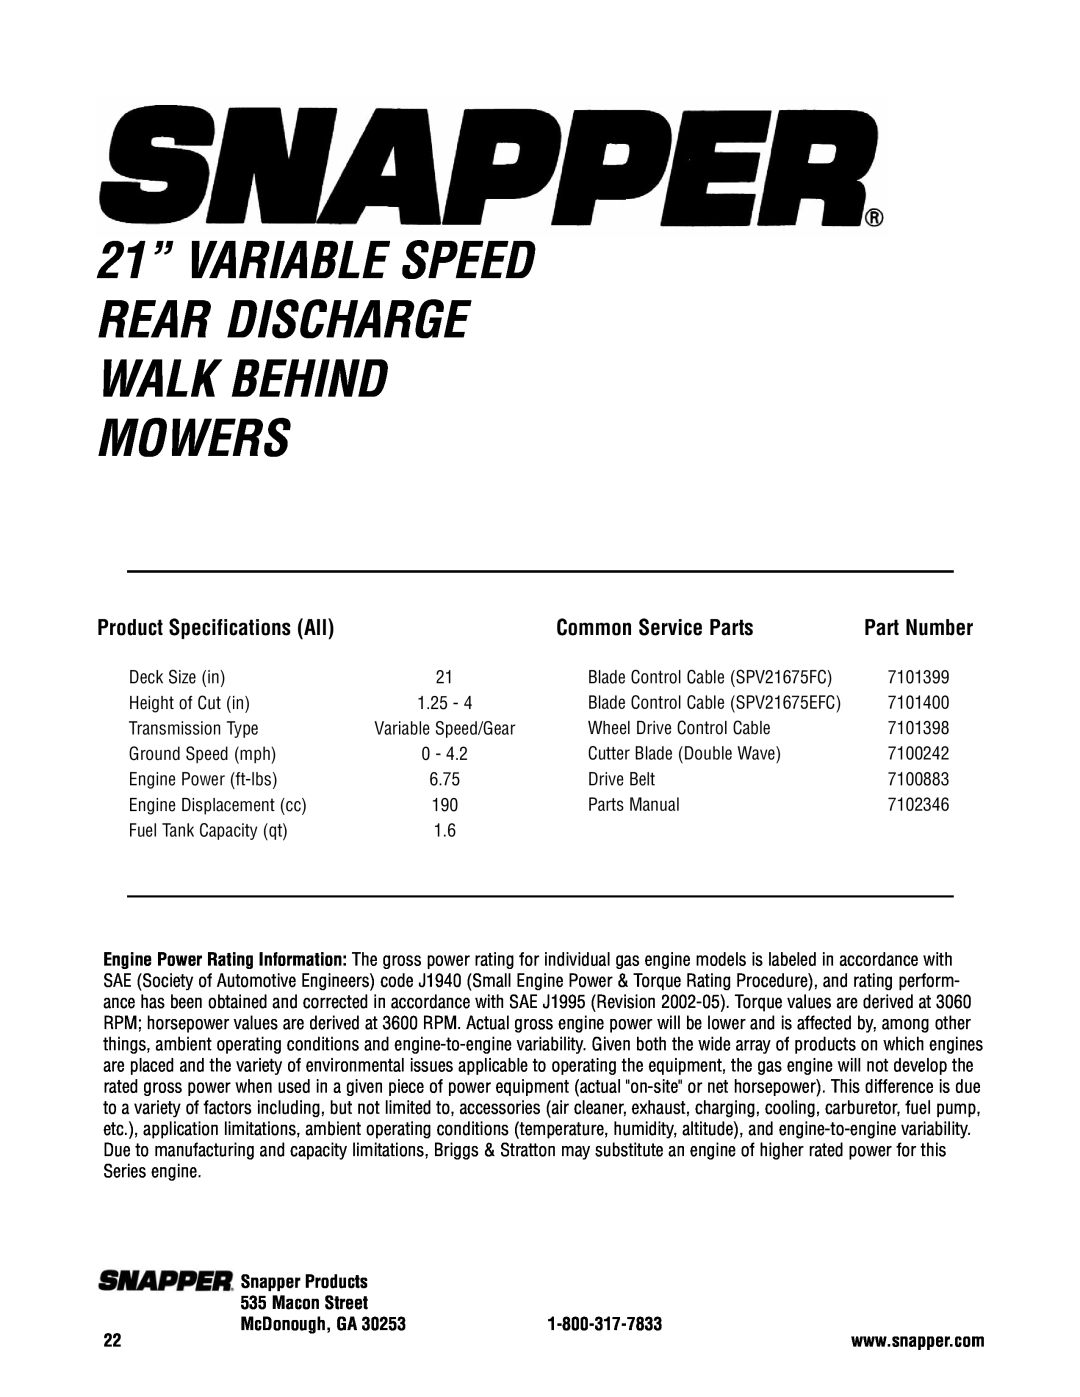 Snapper SPV21675FC, SPV21675EFC Common Service Parts, 21” VARIABLE SPEED REAR DISCHARGE WALK BEHIND MOWERS, Part Number 